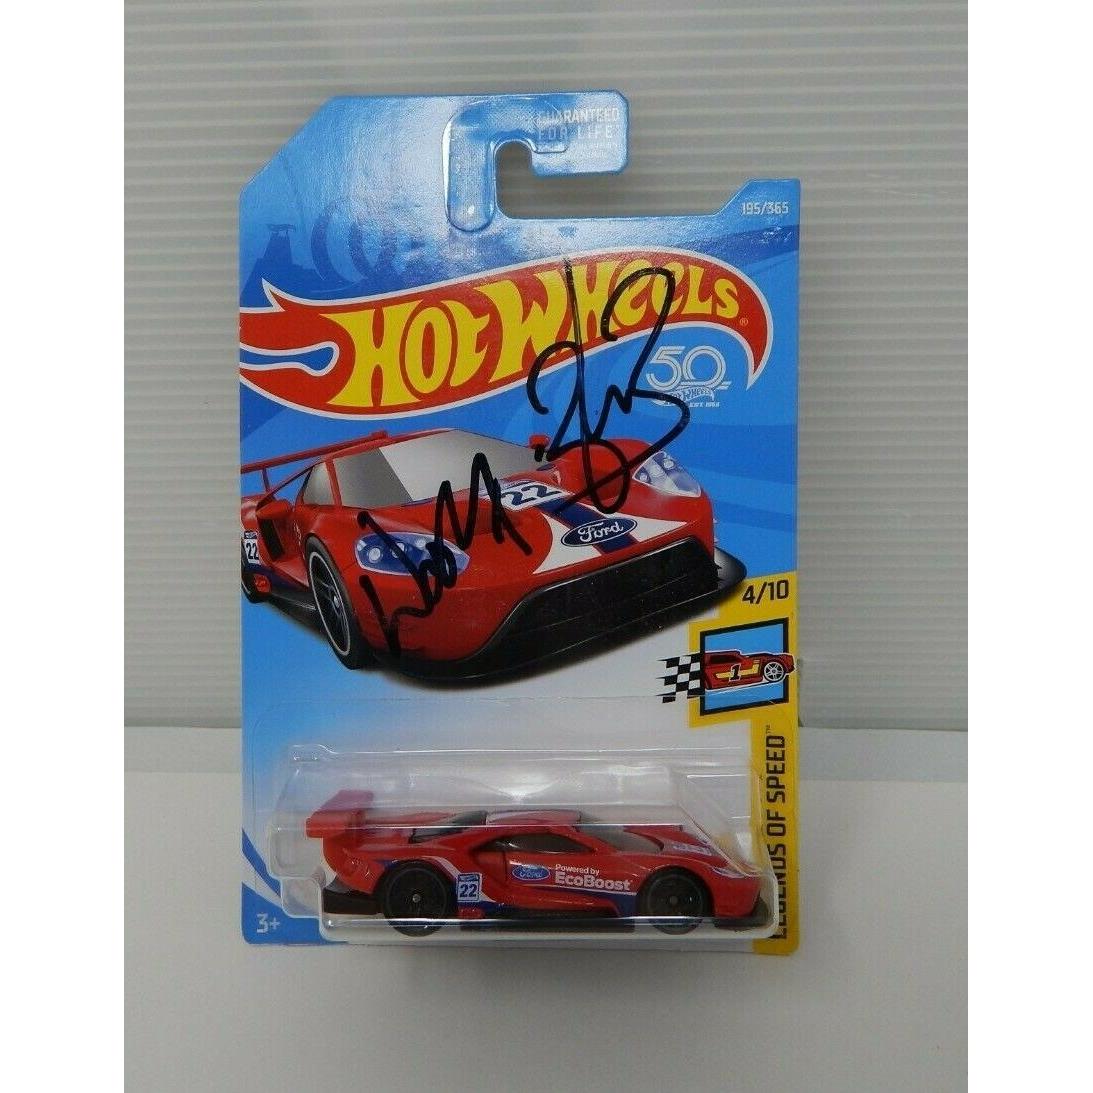 Hot Wheels Legends of Speed 2016 Ford GT Race Signed by Richard Westbrook